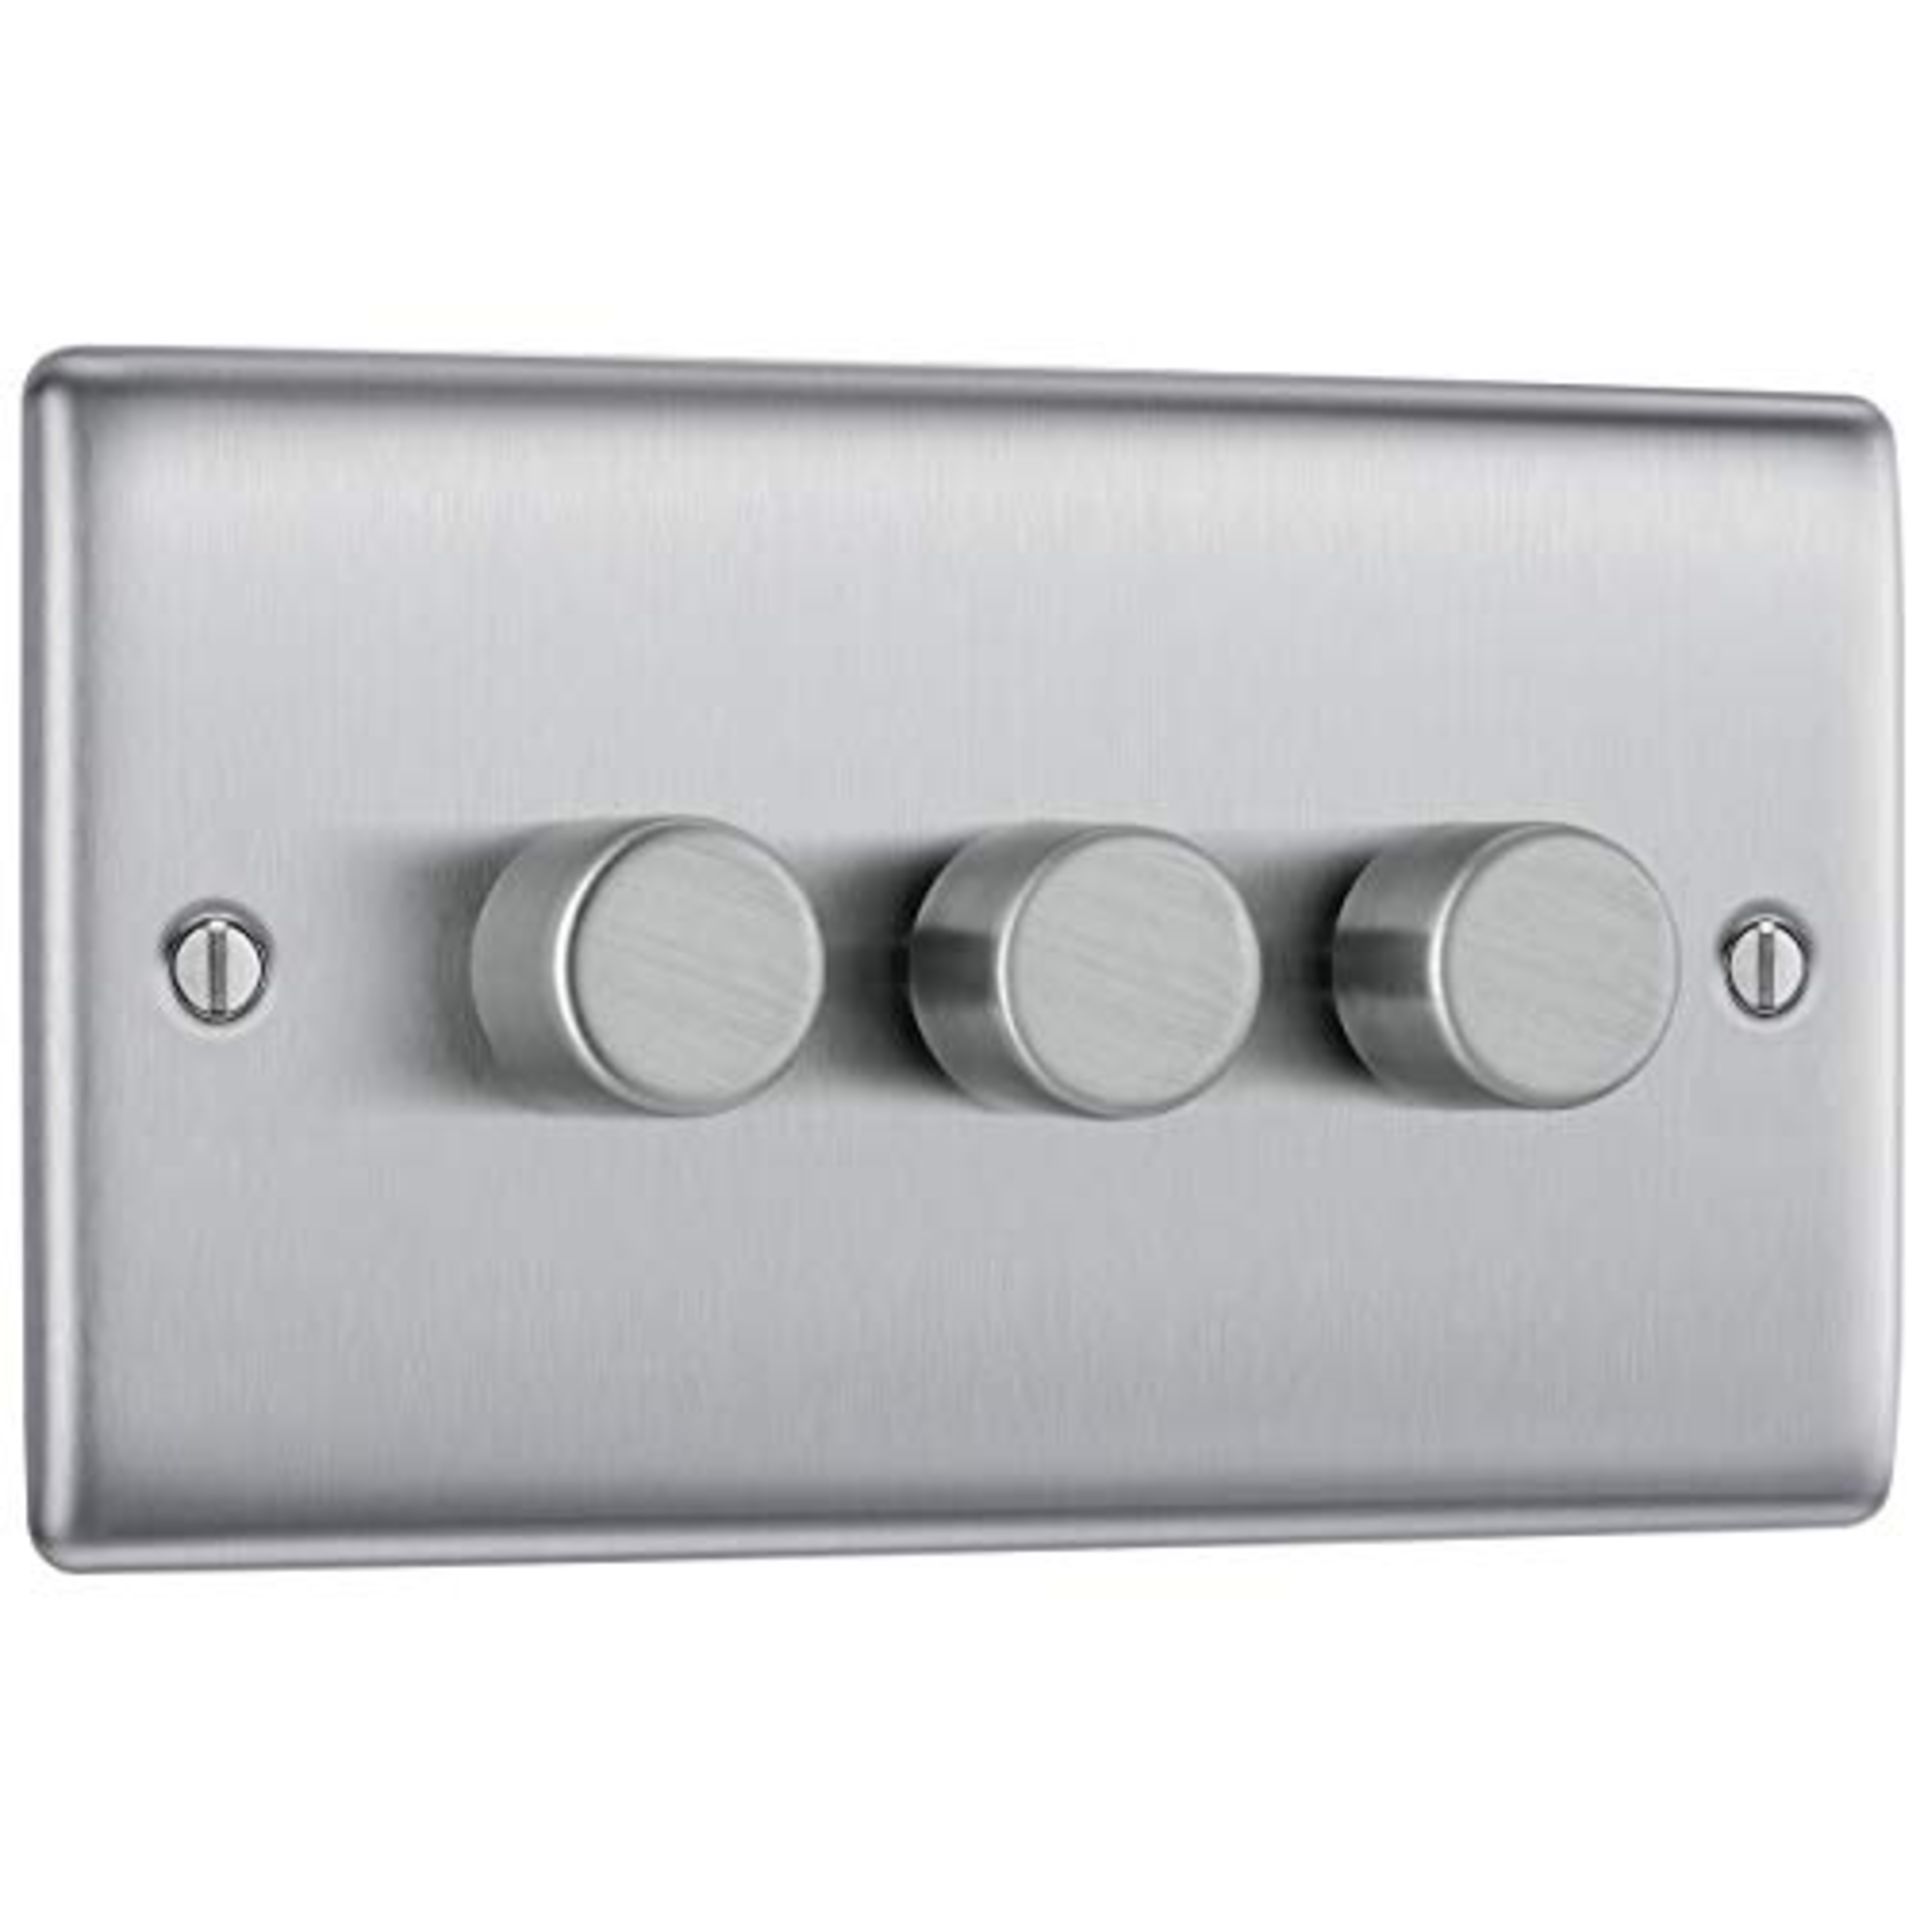 BG Electrical NBS83-01 BRUSHED STEEL 200W TRIPLE DIMMER SWITCH, 2-WAY PUSH ON/OFF, TRA - Image 3 of 3